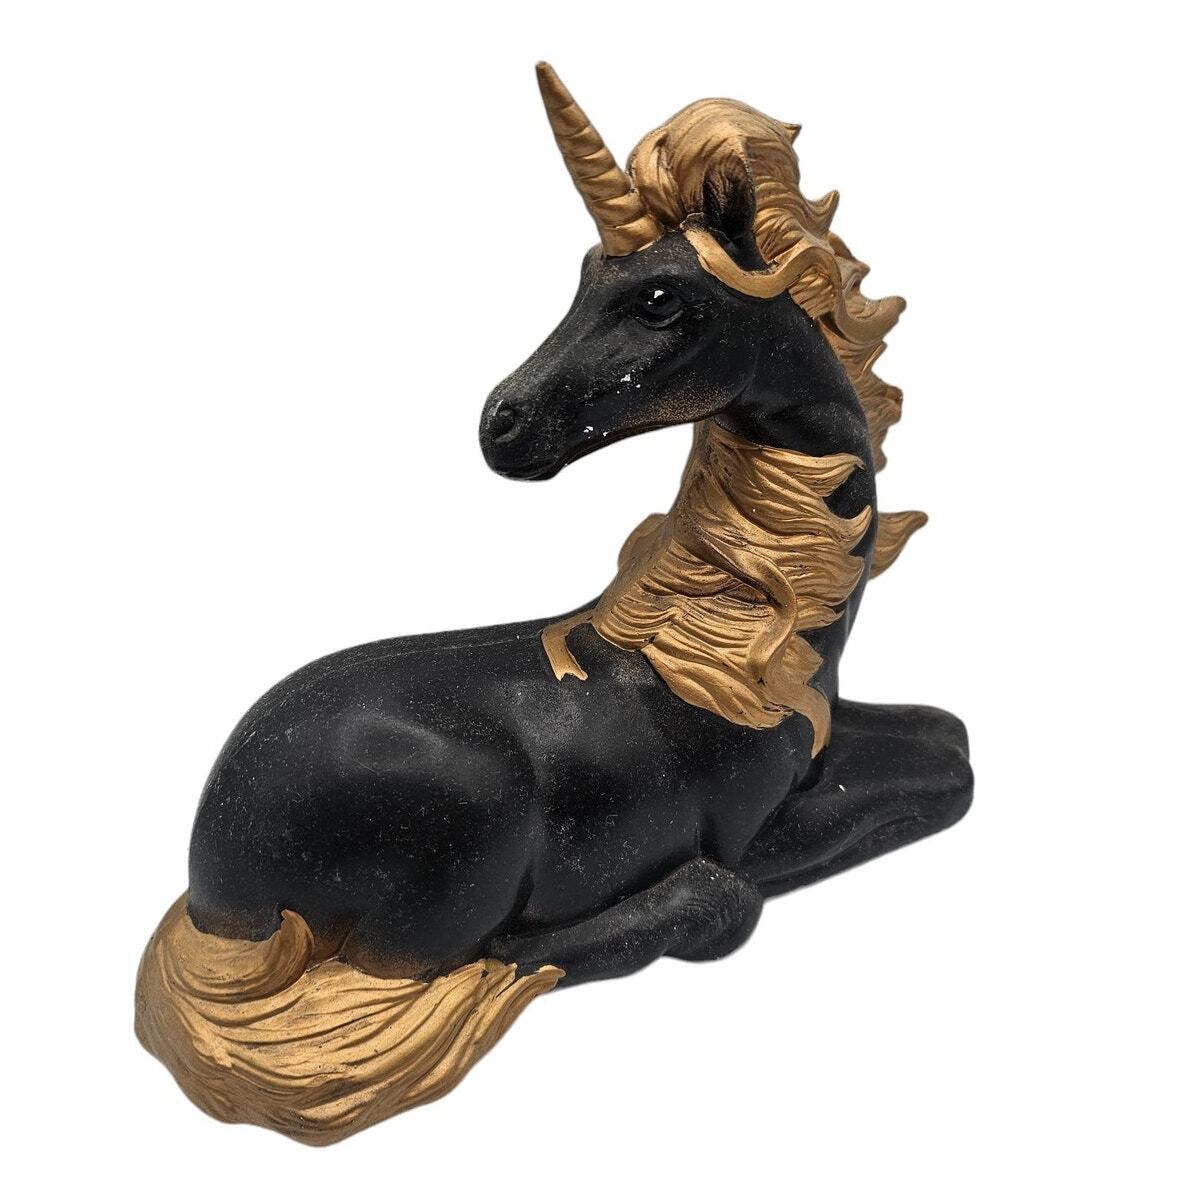 Vintage 1990s Hand Painted Laying Down Unicorn Figurine Black Gold Mane Whimsy